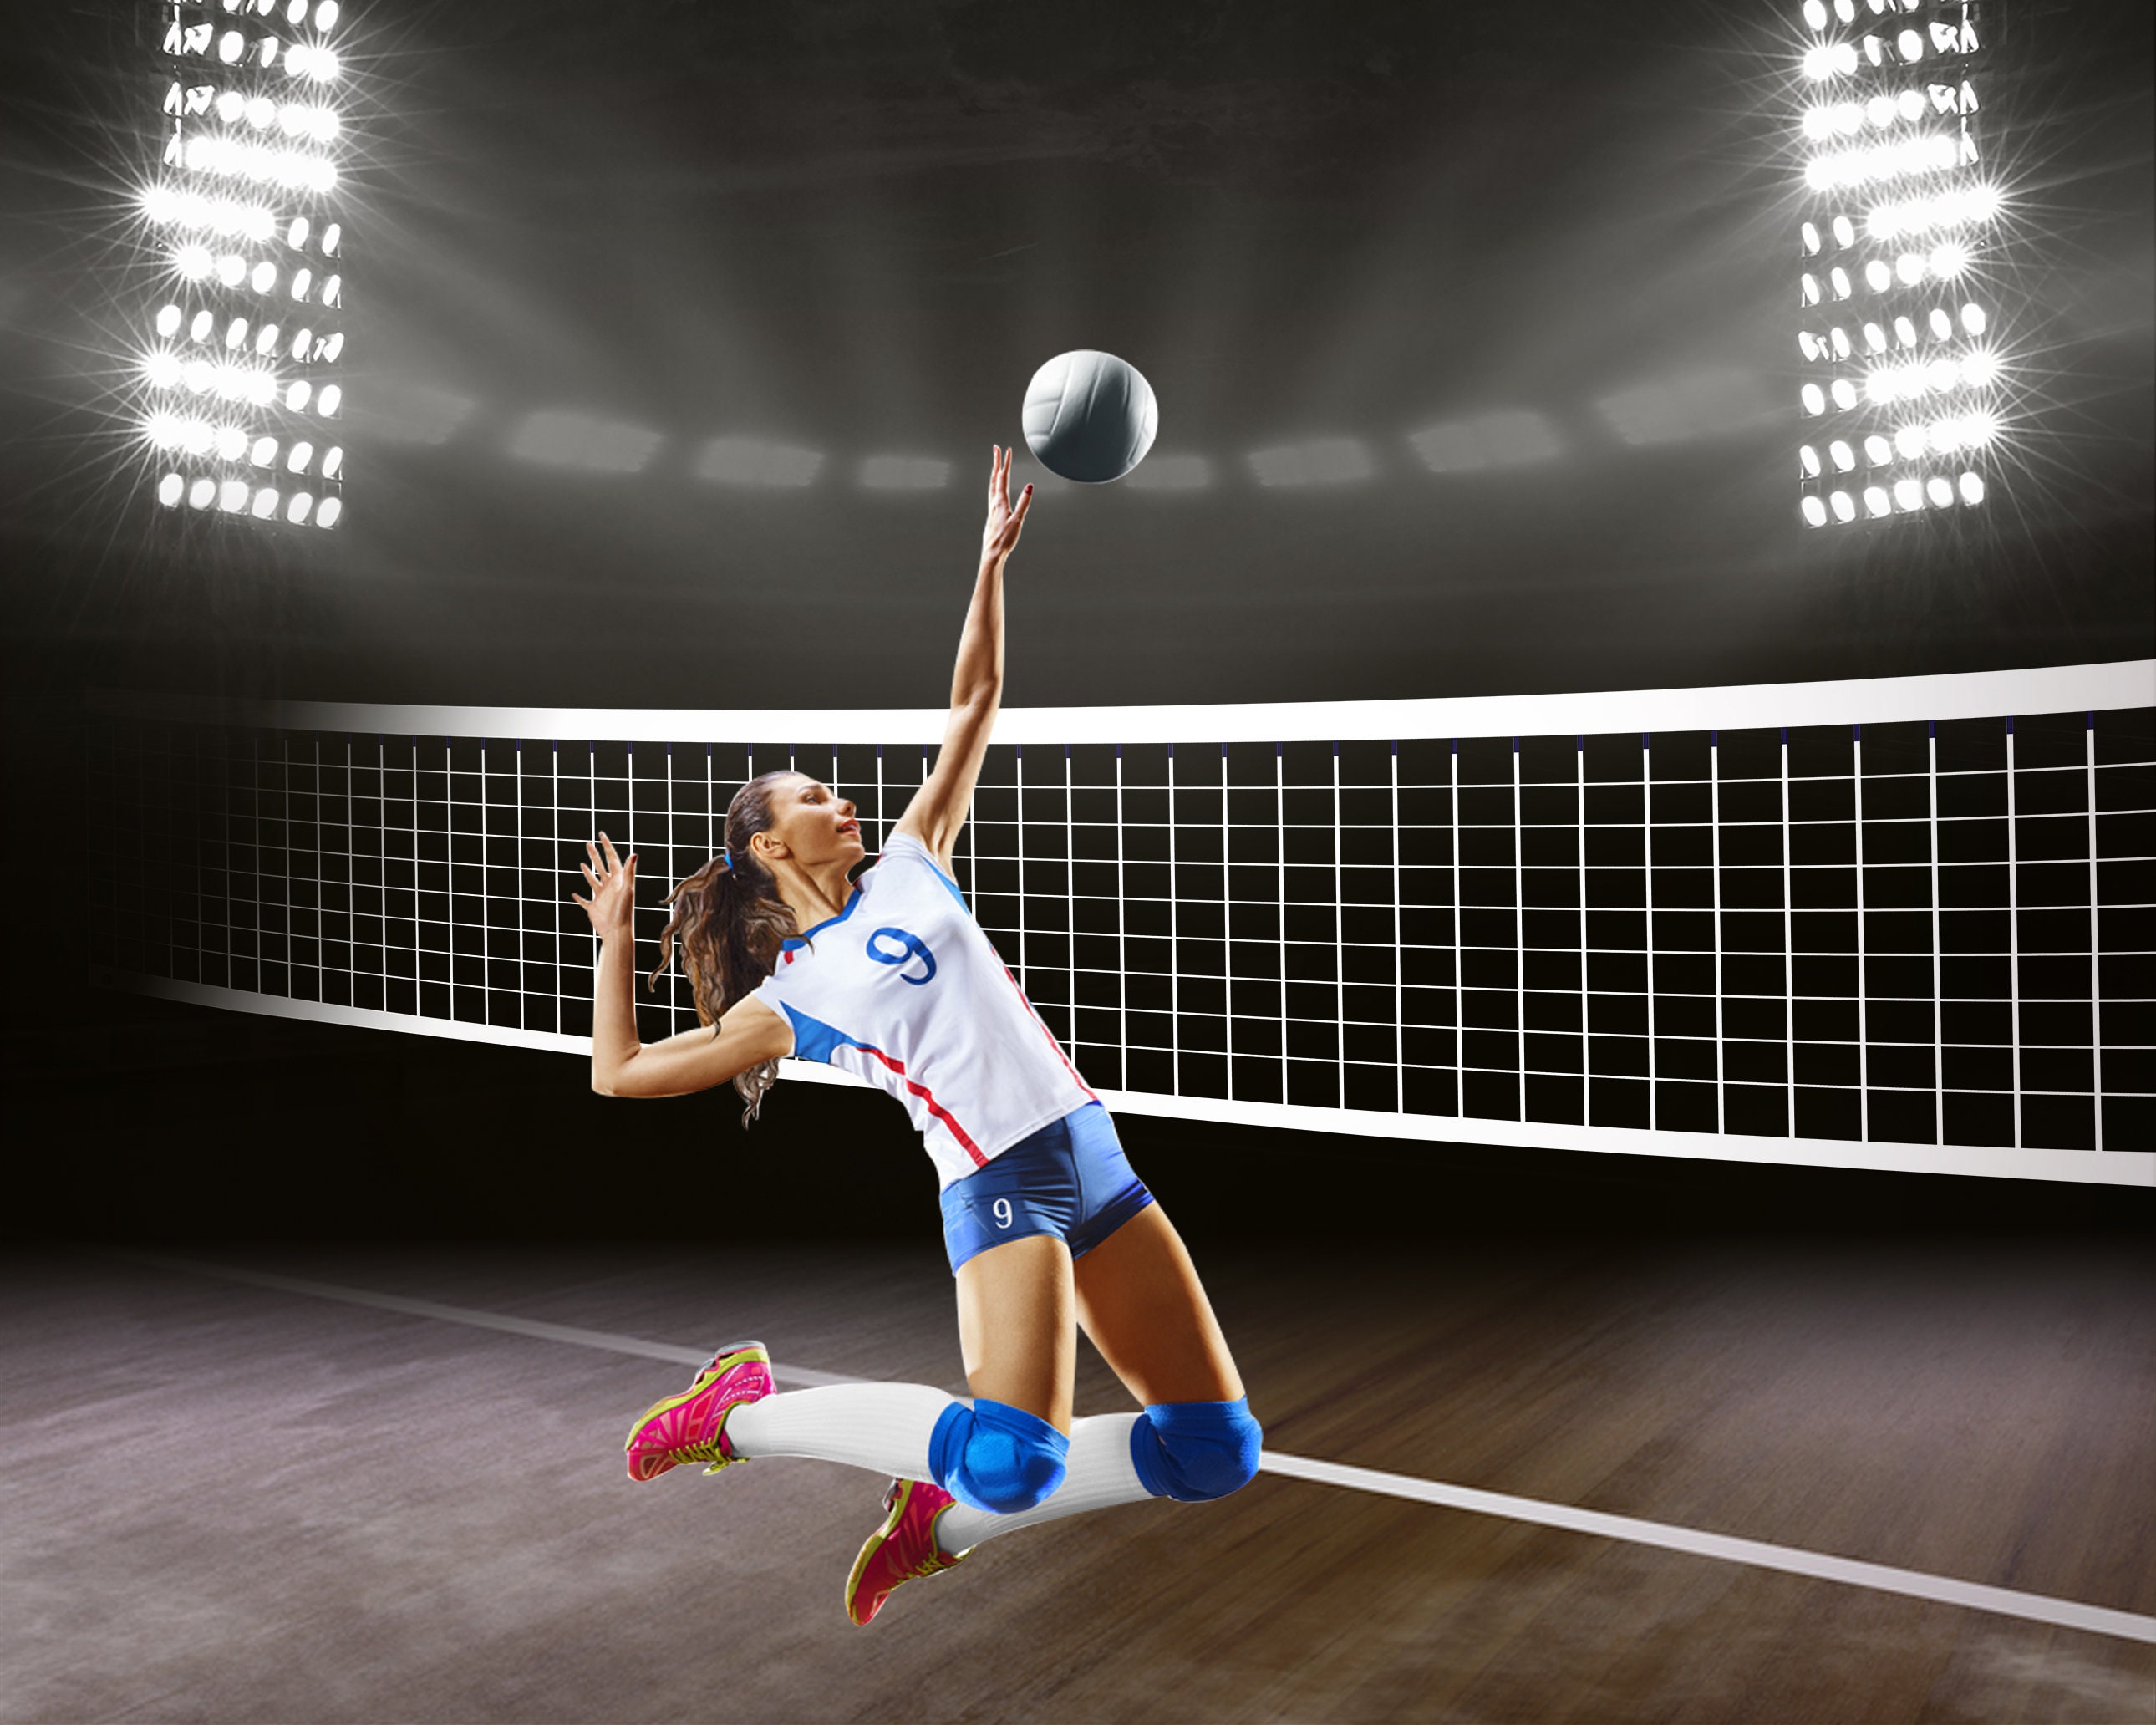 Sports Poster Template Volleyball Digital Backdrop Volleyball ...